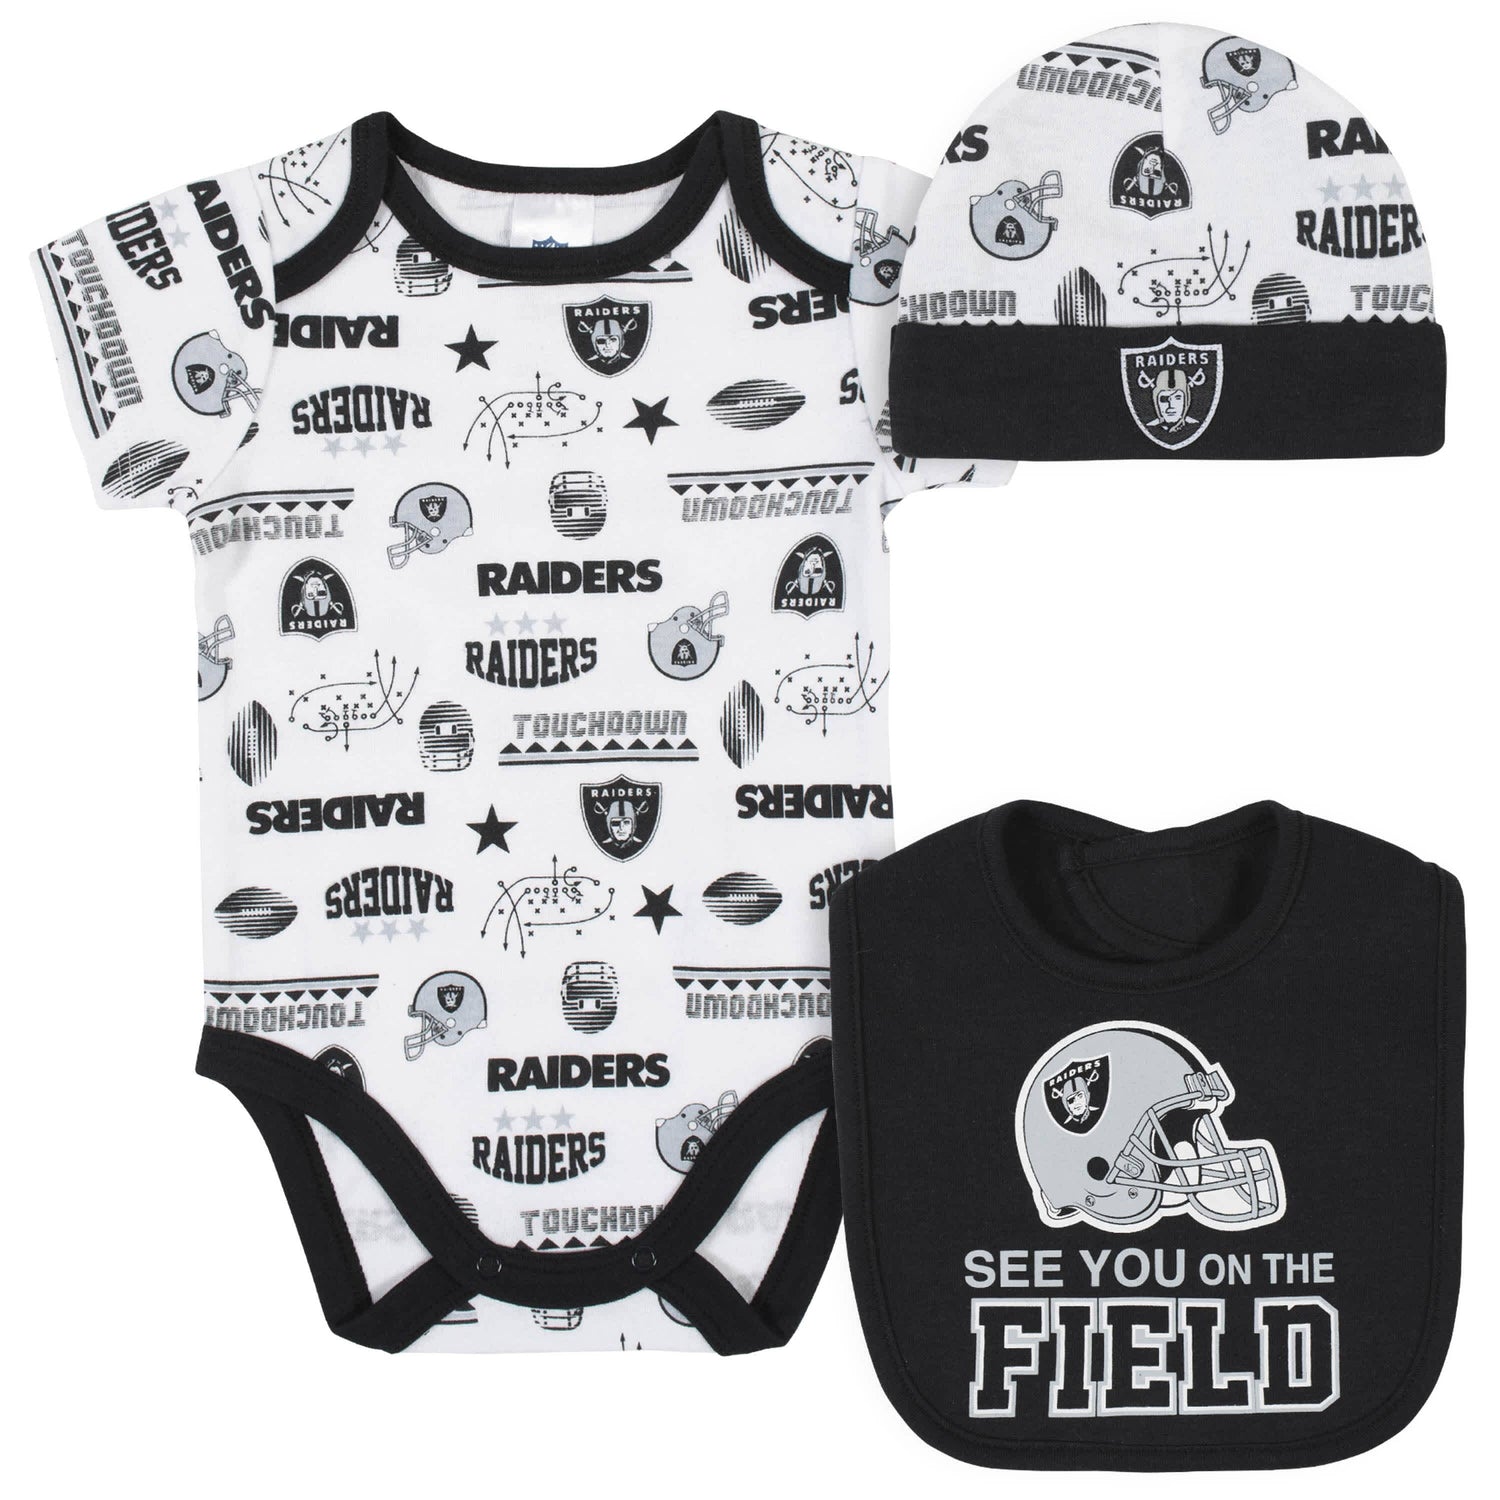 Lids Oakland Raiders Jersey Black - $48 (63% Off Retail) - From Sara